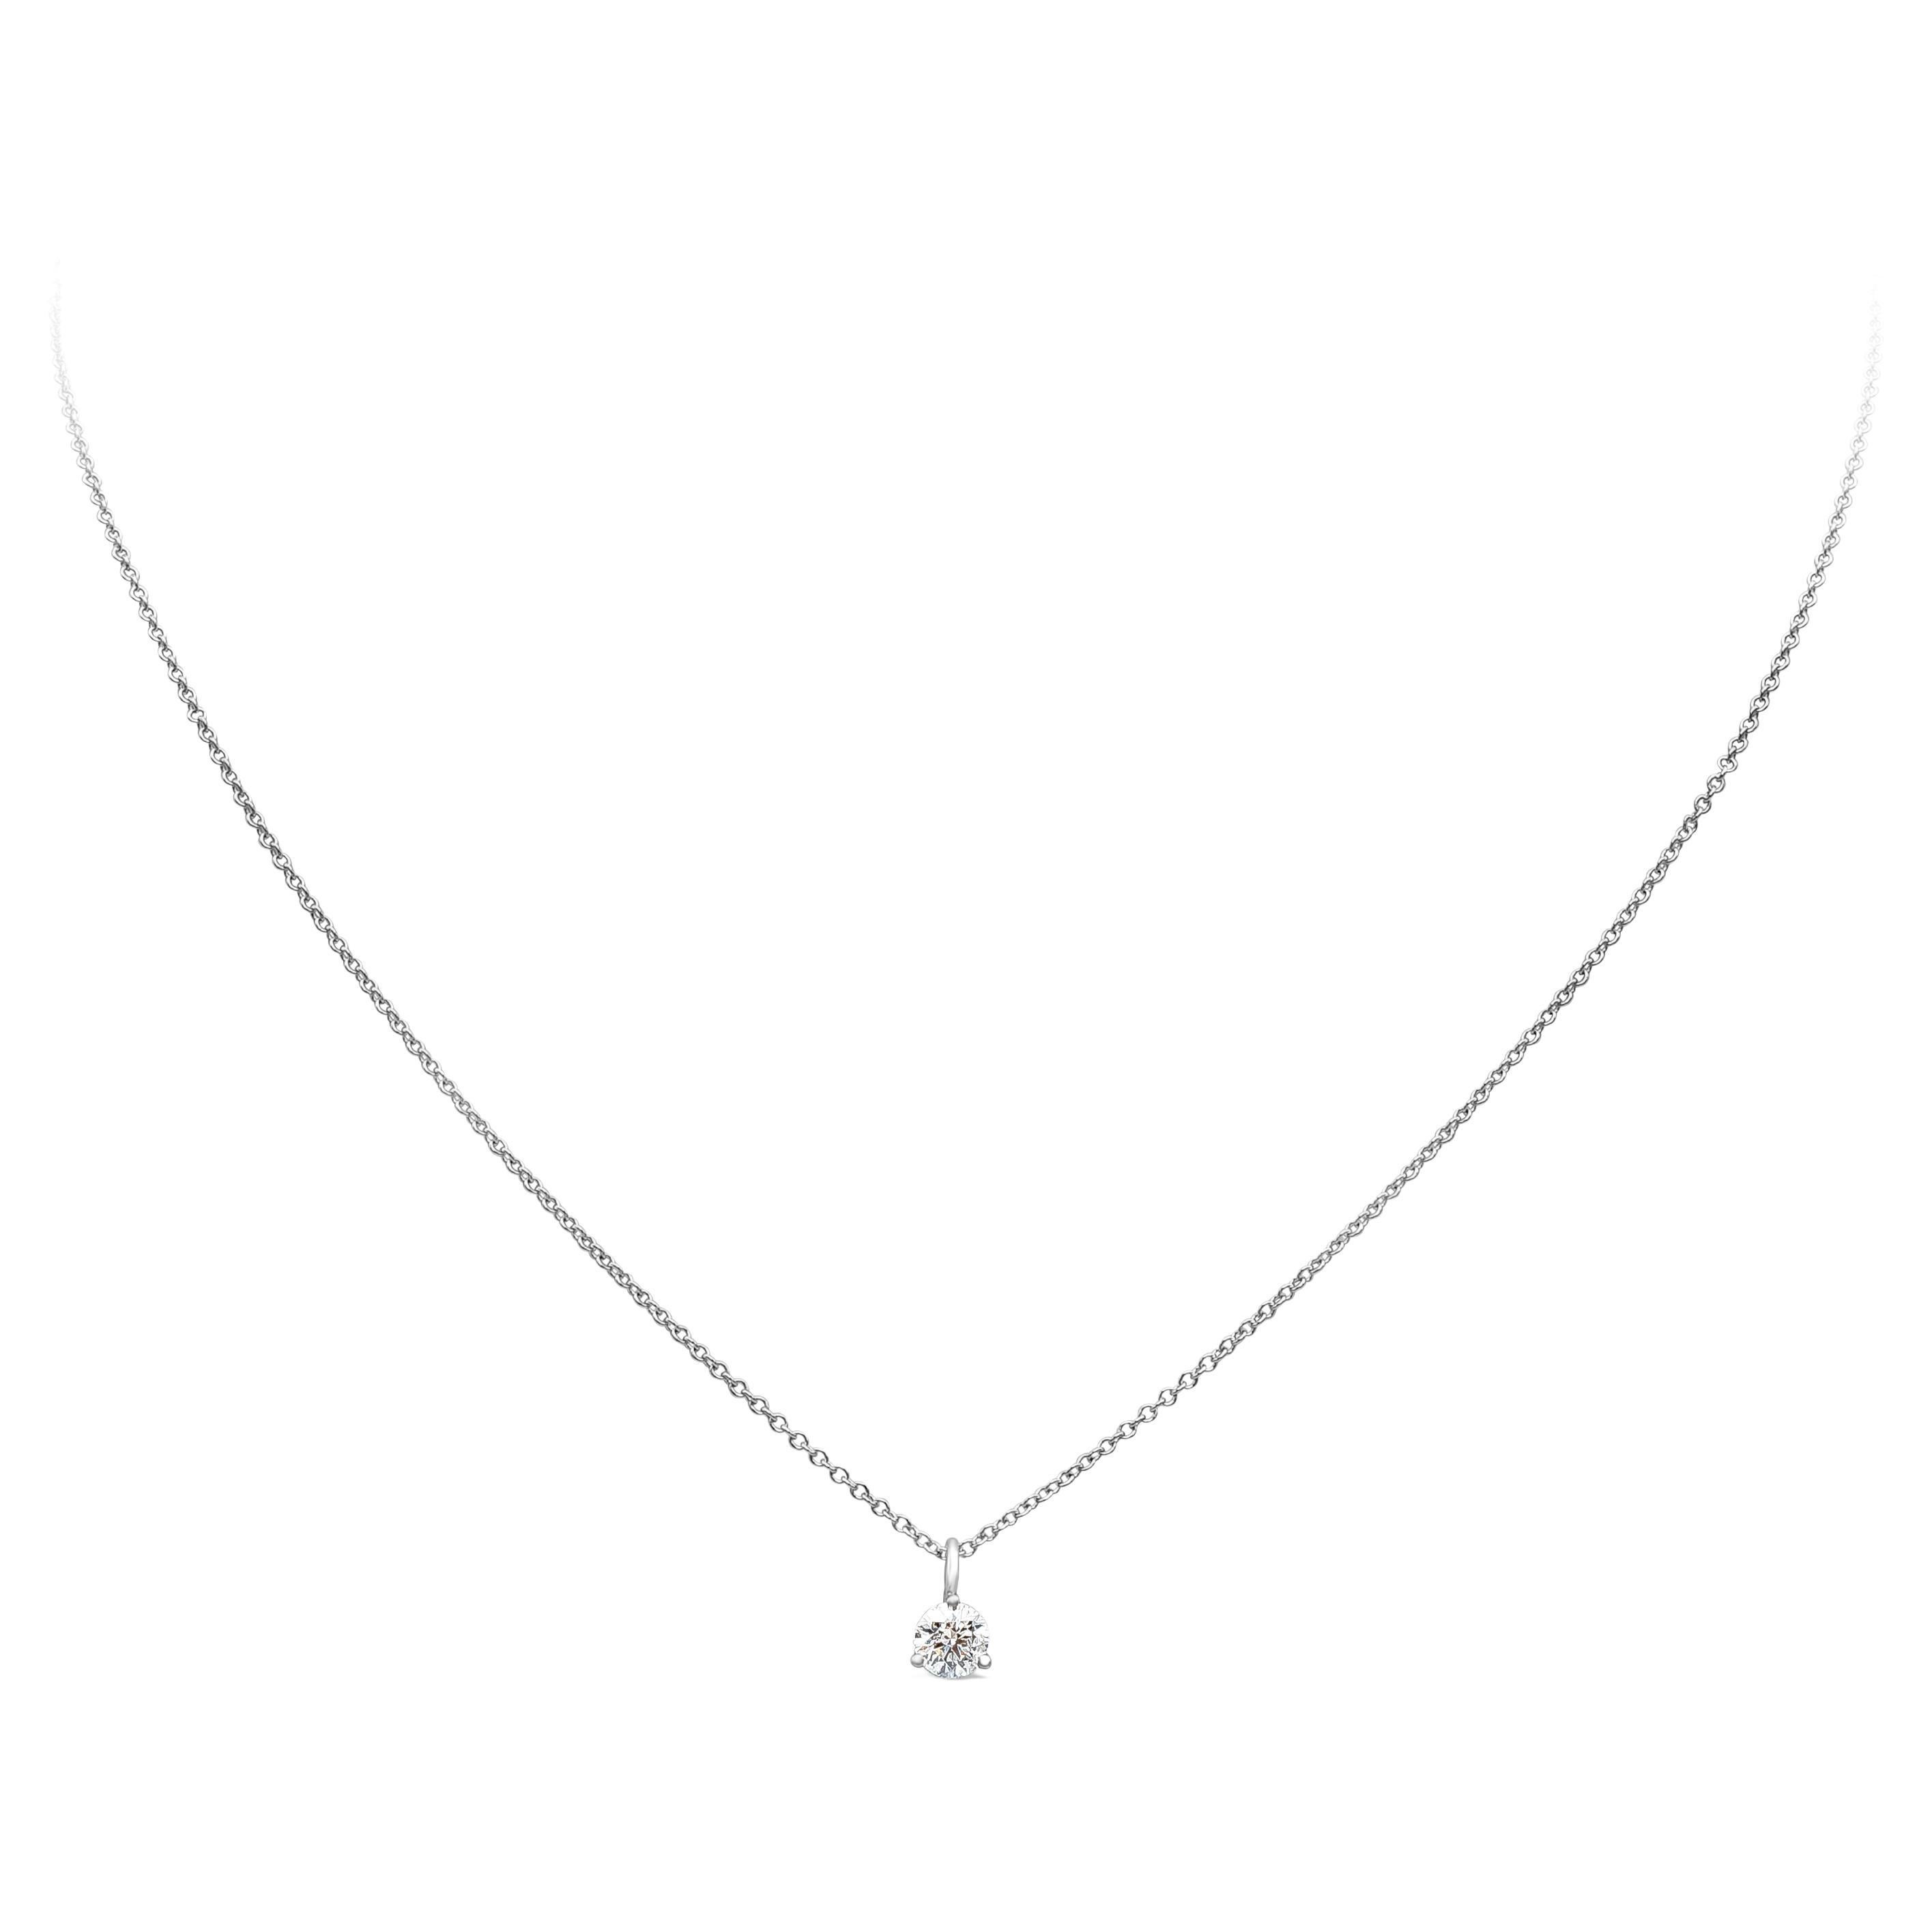 This simple and timeless pendant necklace showcases one brilliant round cut diamond. Diamond weighs 0.31 carats and mounted in a beautiful three prong setting. Made in 14 karat and 18 karat white gold. 

Style available in different price ranges.